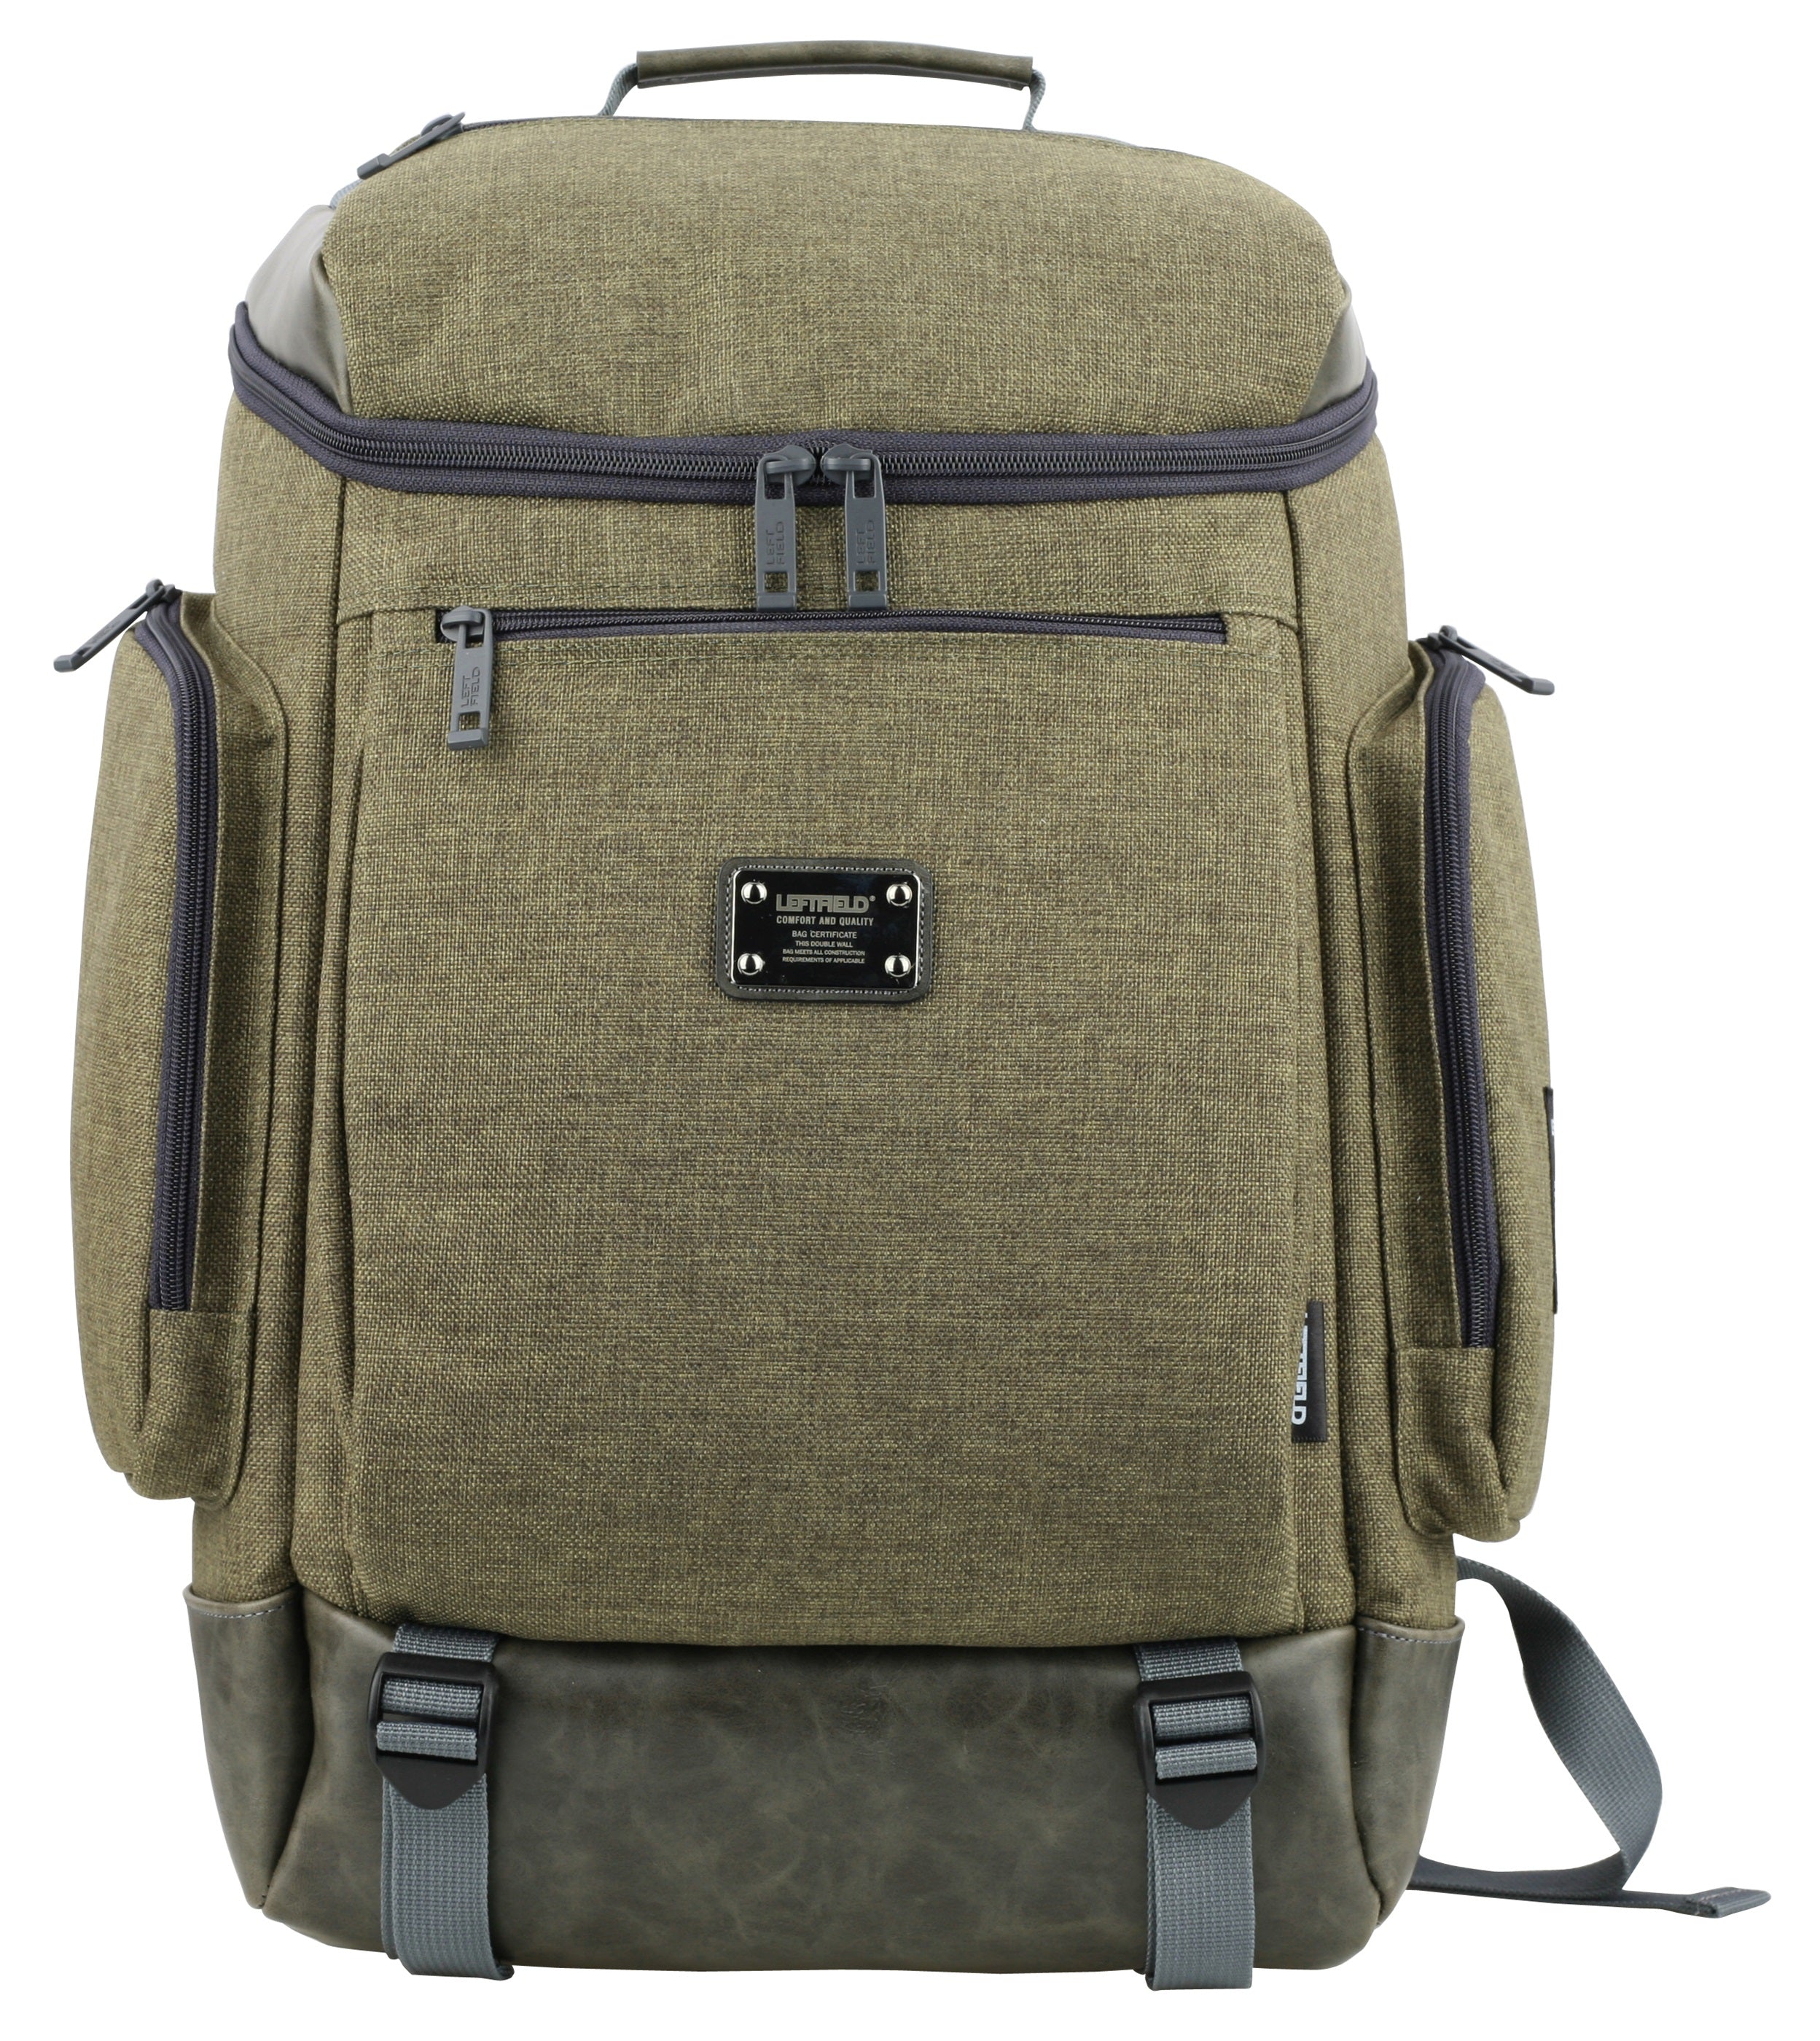 Green Large Canvas Casual Backpacks Daypack